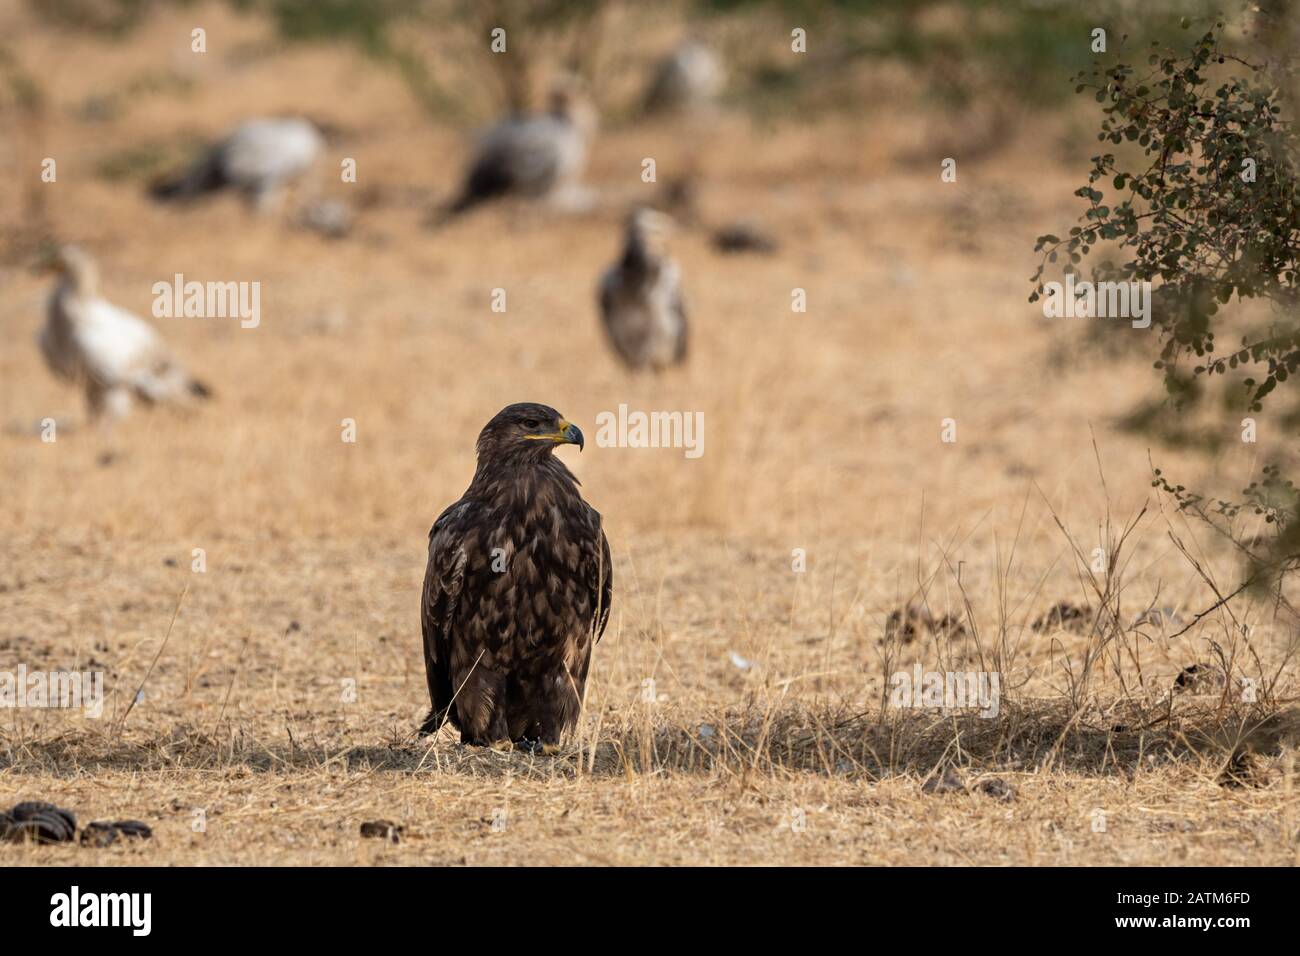 Steppe eagle or Aquila nipalensis portrait or close-up during winter migration at jorbeer conservation reserve or dumping yard, bikaner, india Stock Photo